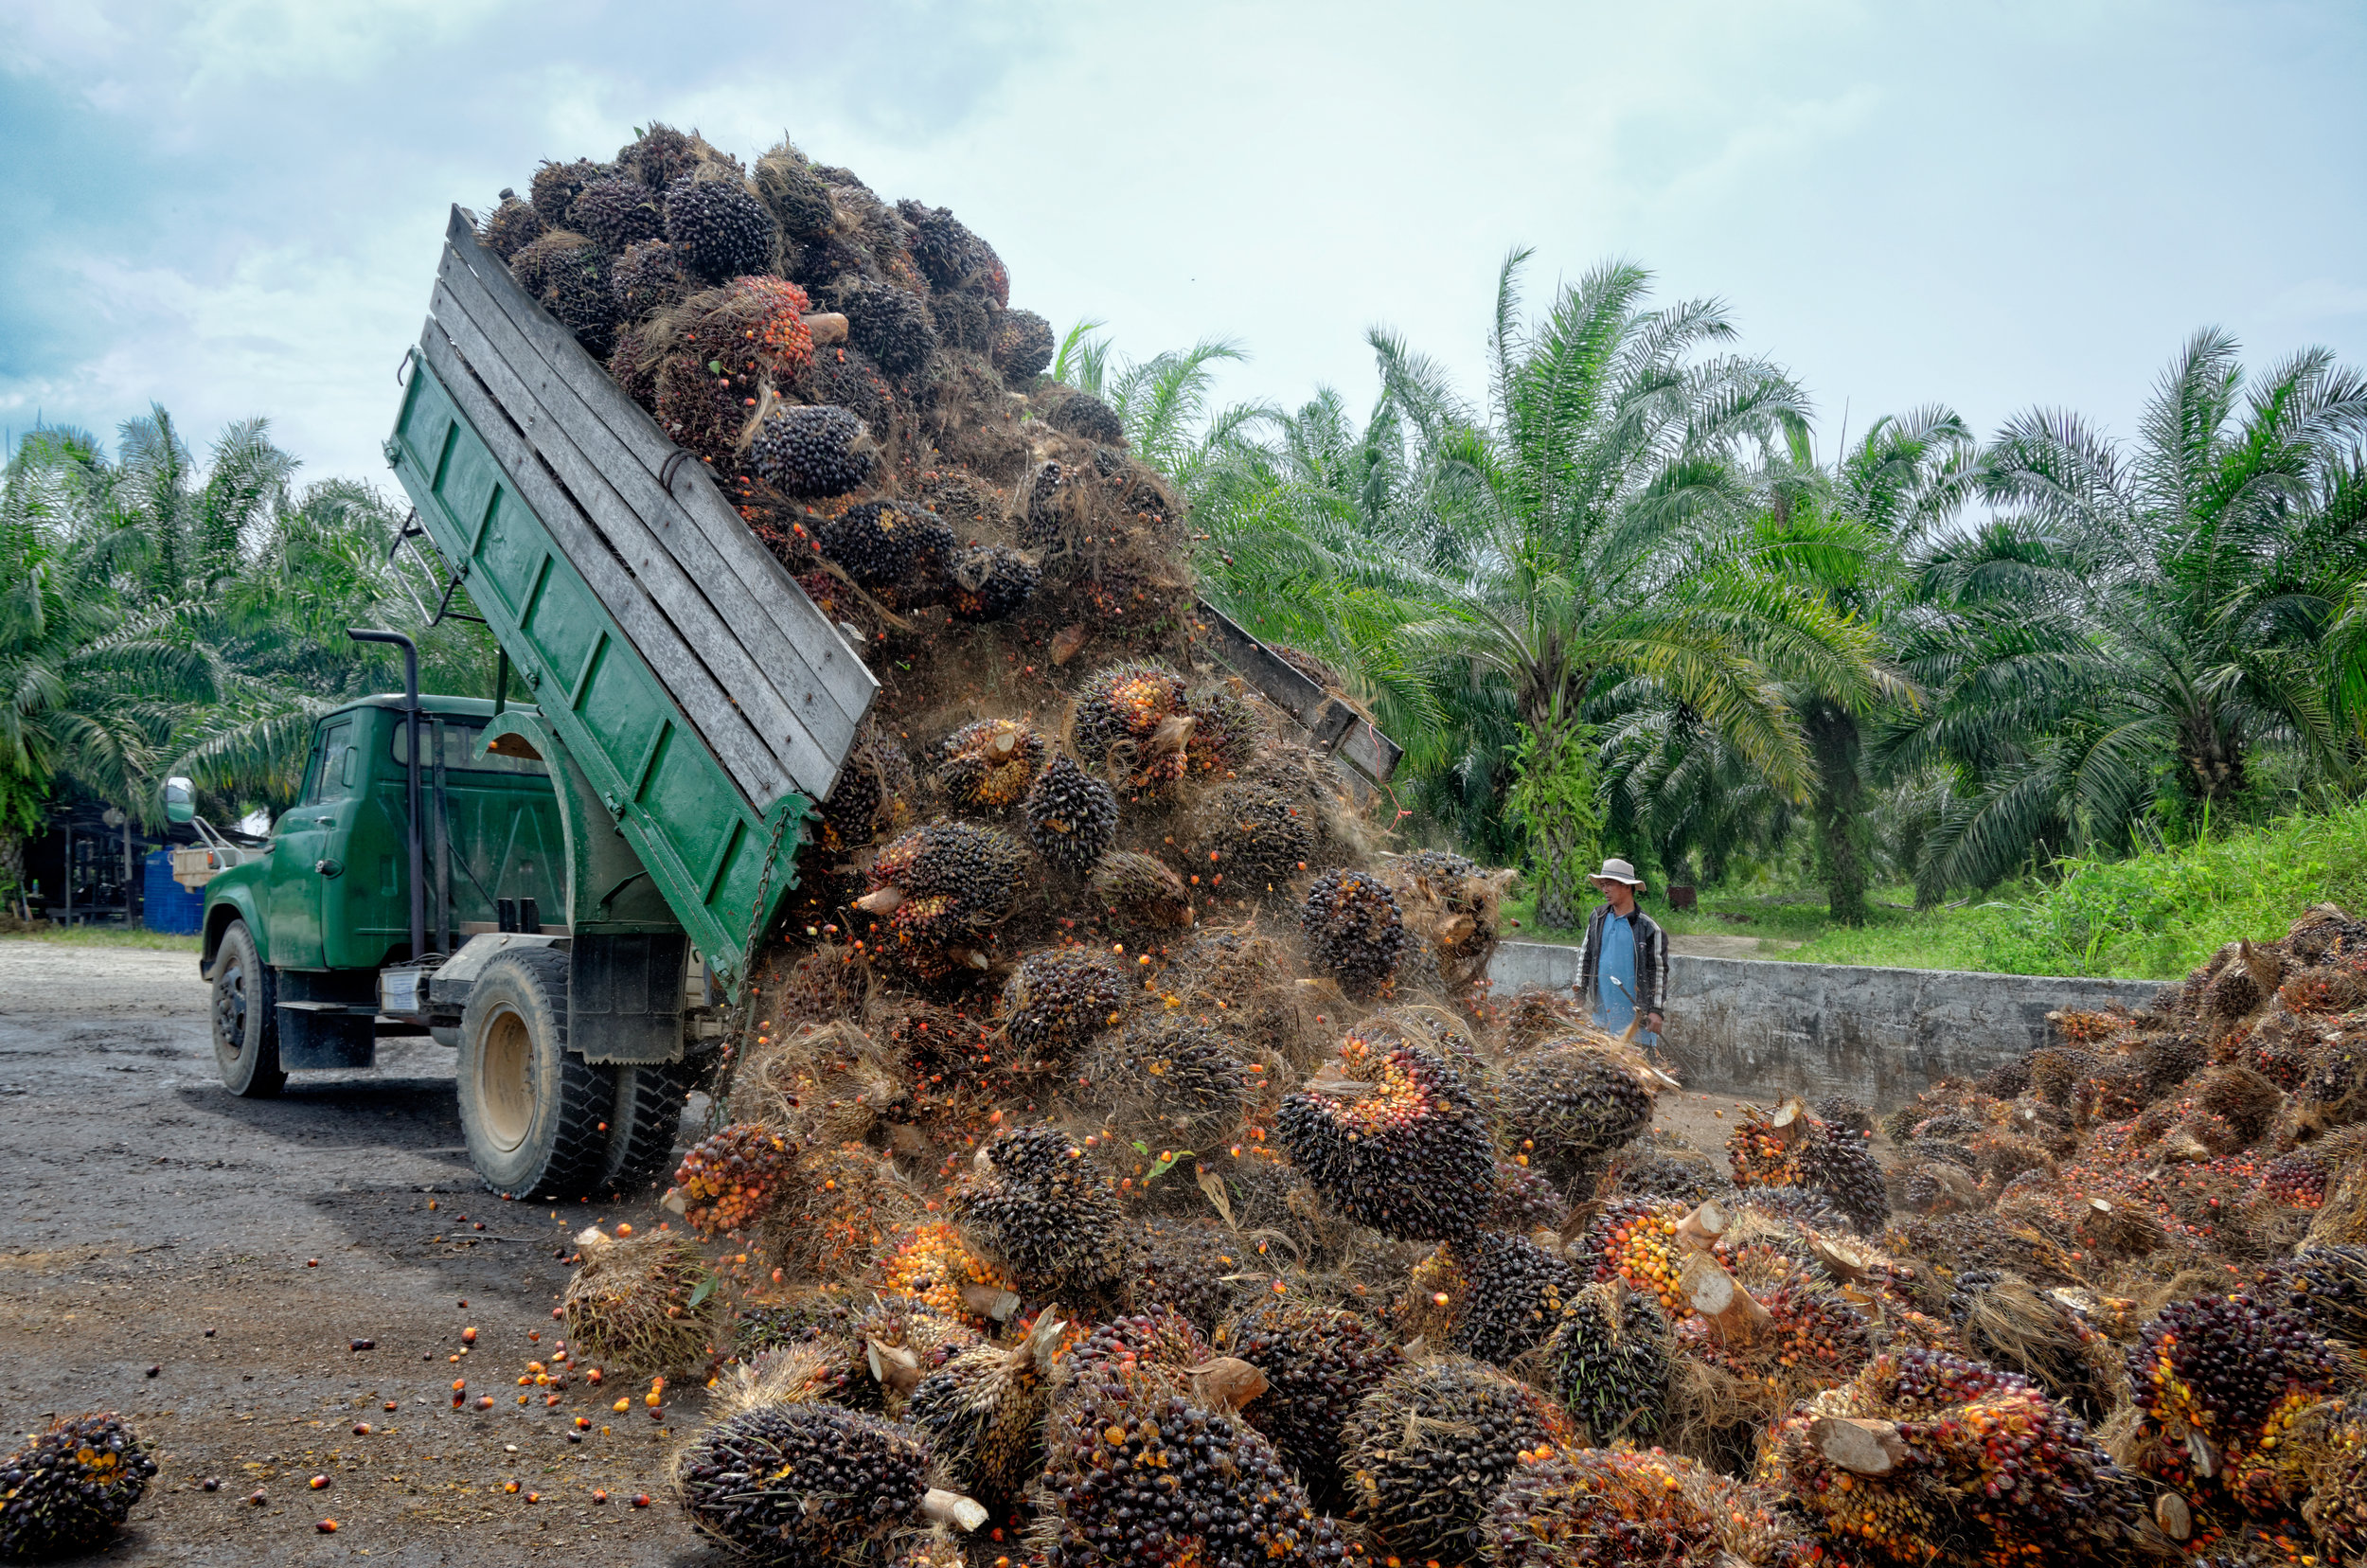 PICTURED: Plantation worker watches as a truck unloads freshly harvested oil palm fruit bunches at a collection point.